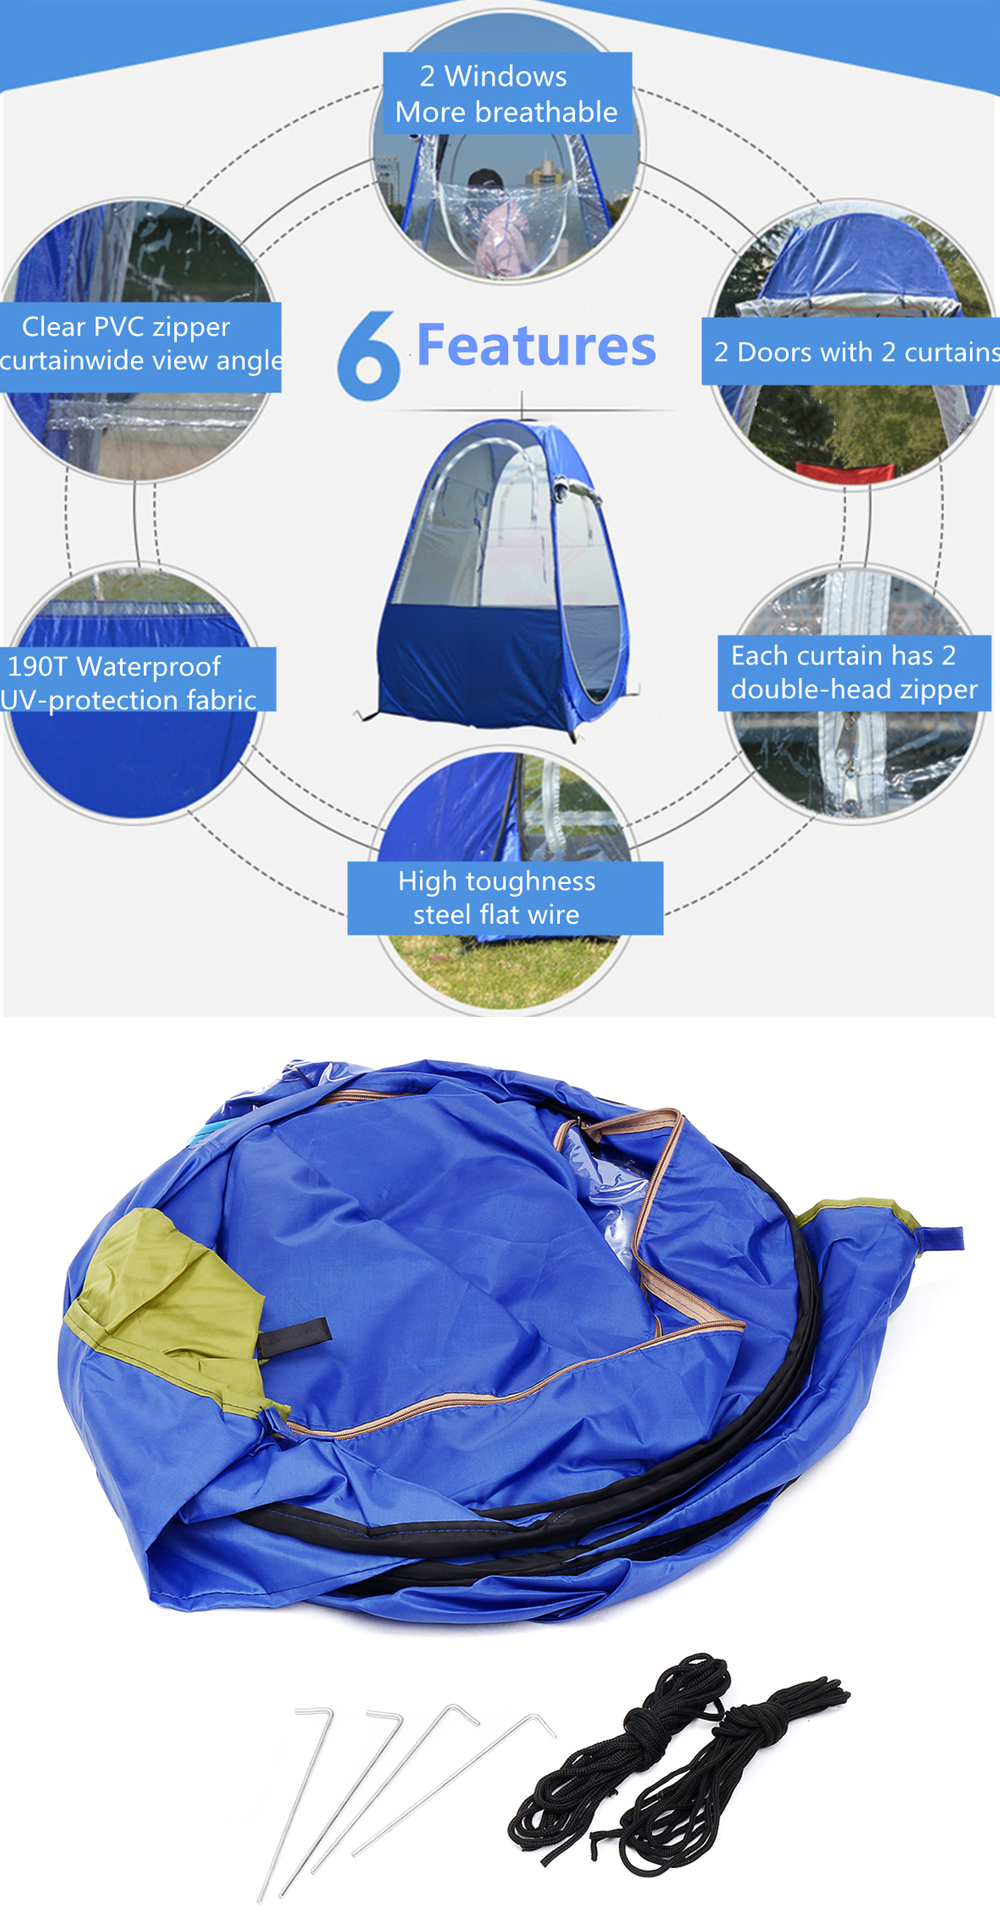 1-2-People-Outdoor-Portable-Camping-Tent-Folding-Pop-Up-UV-Proof-Sunshade-Shelter-Rainproof-Canopy-1403122